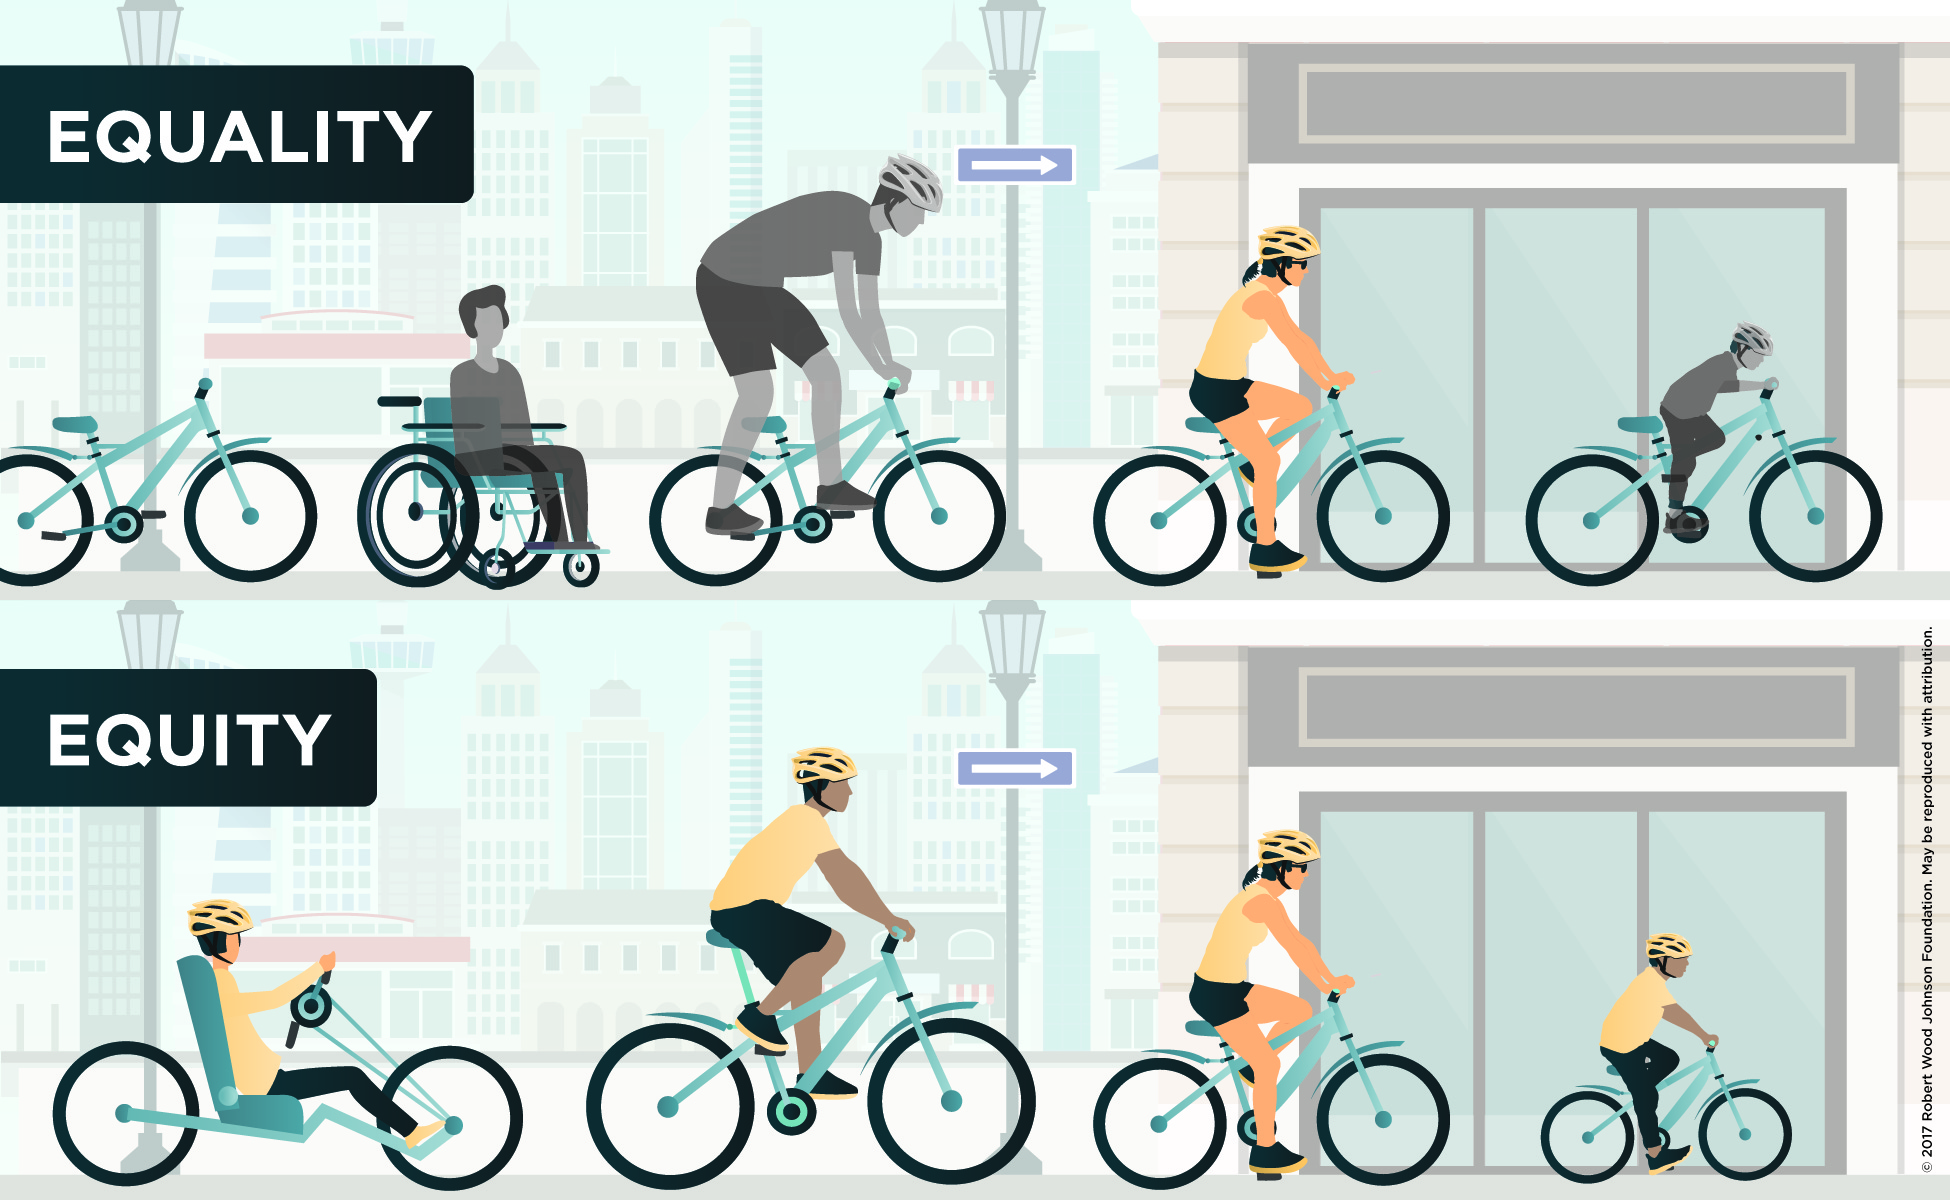 People on a variety of bicycles to demonstrate the differences between equality and equity.